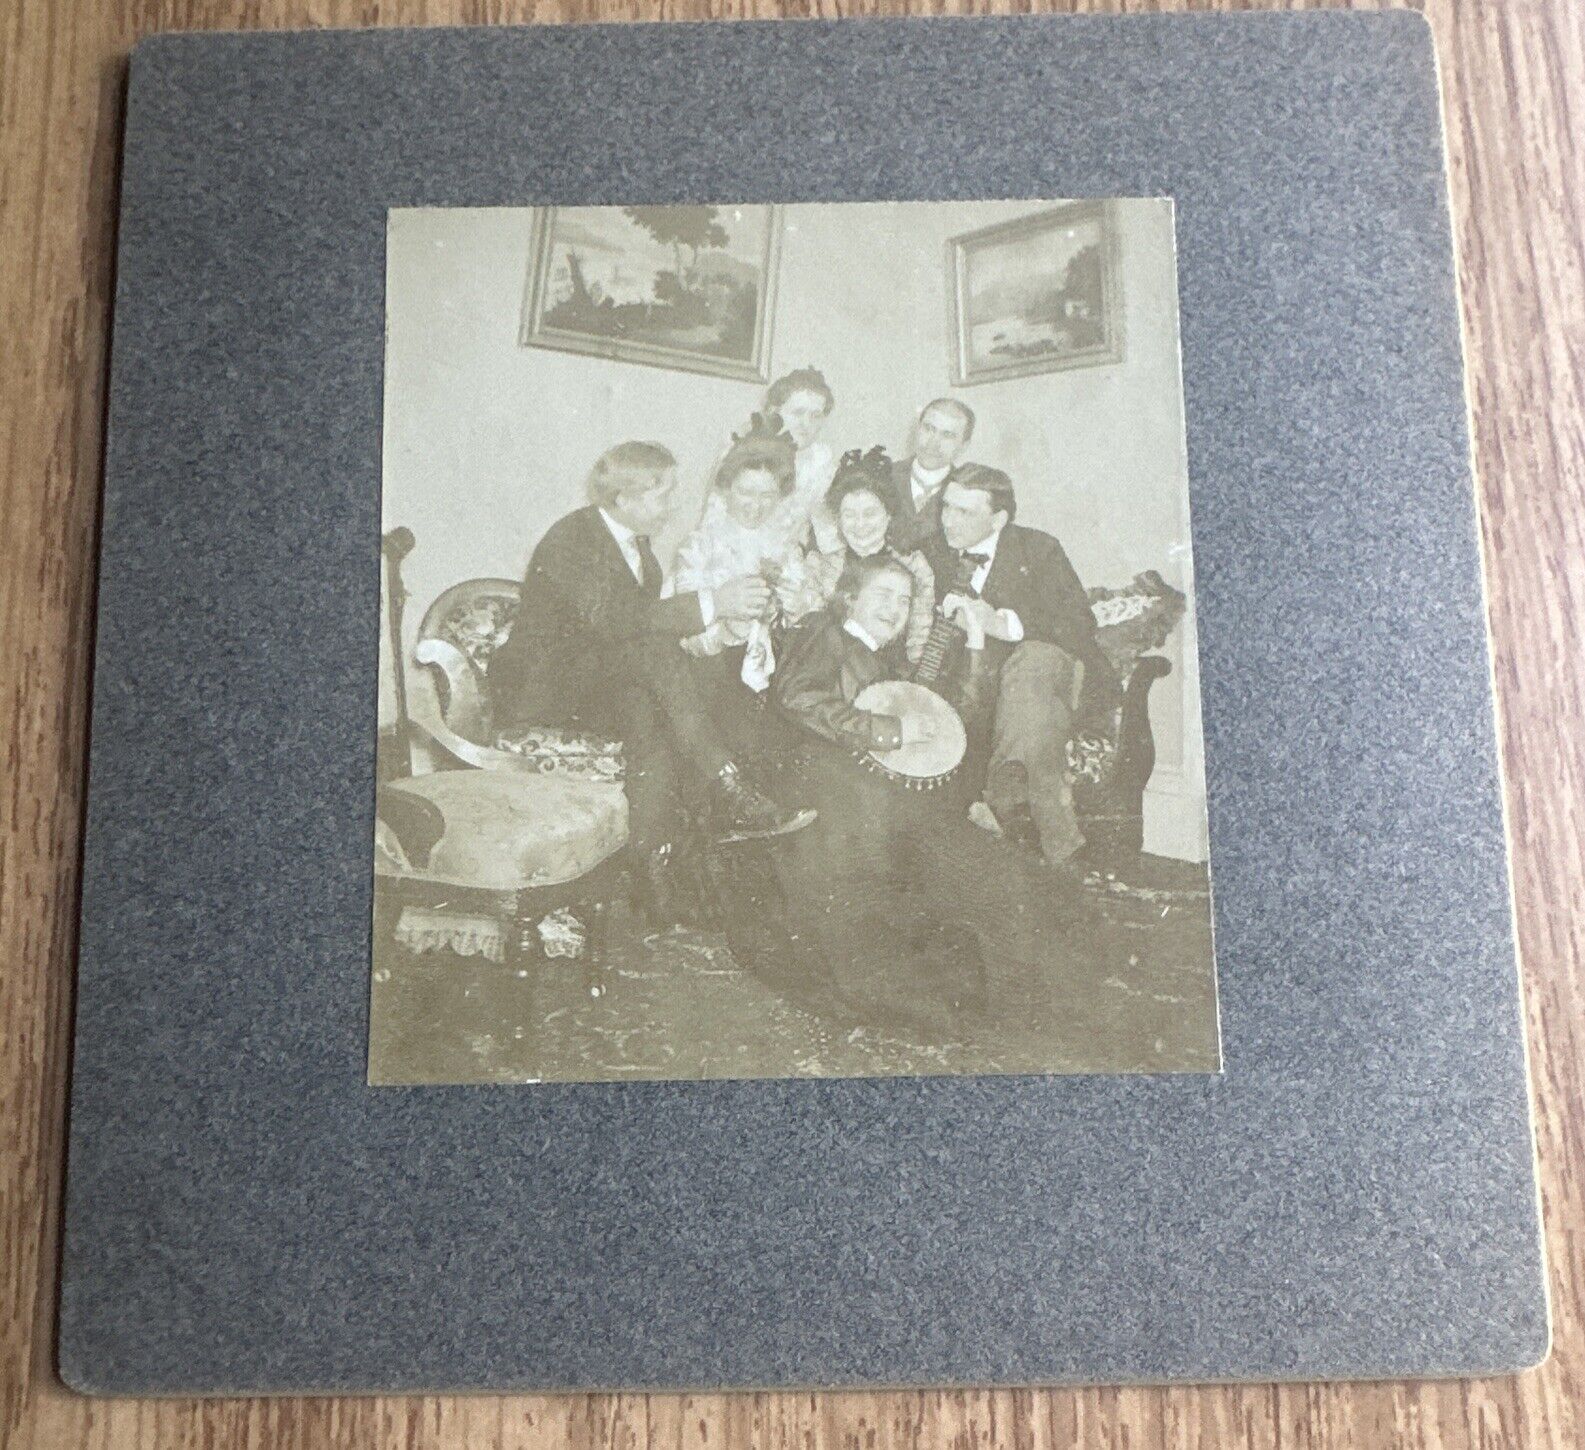 Mounted Photograph Large Group with One Lady Holding Banjo Instrument